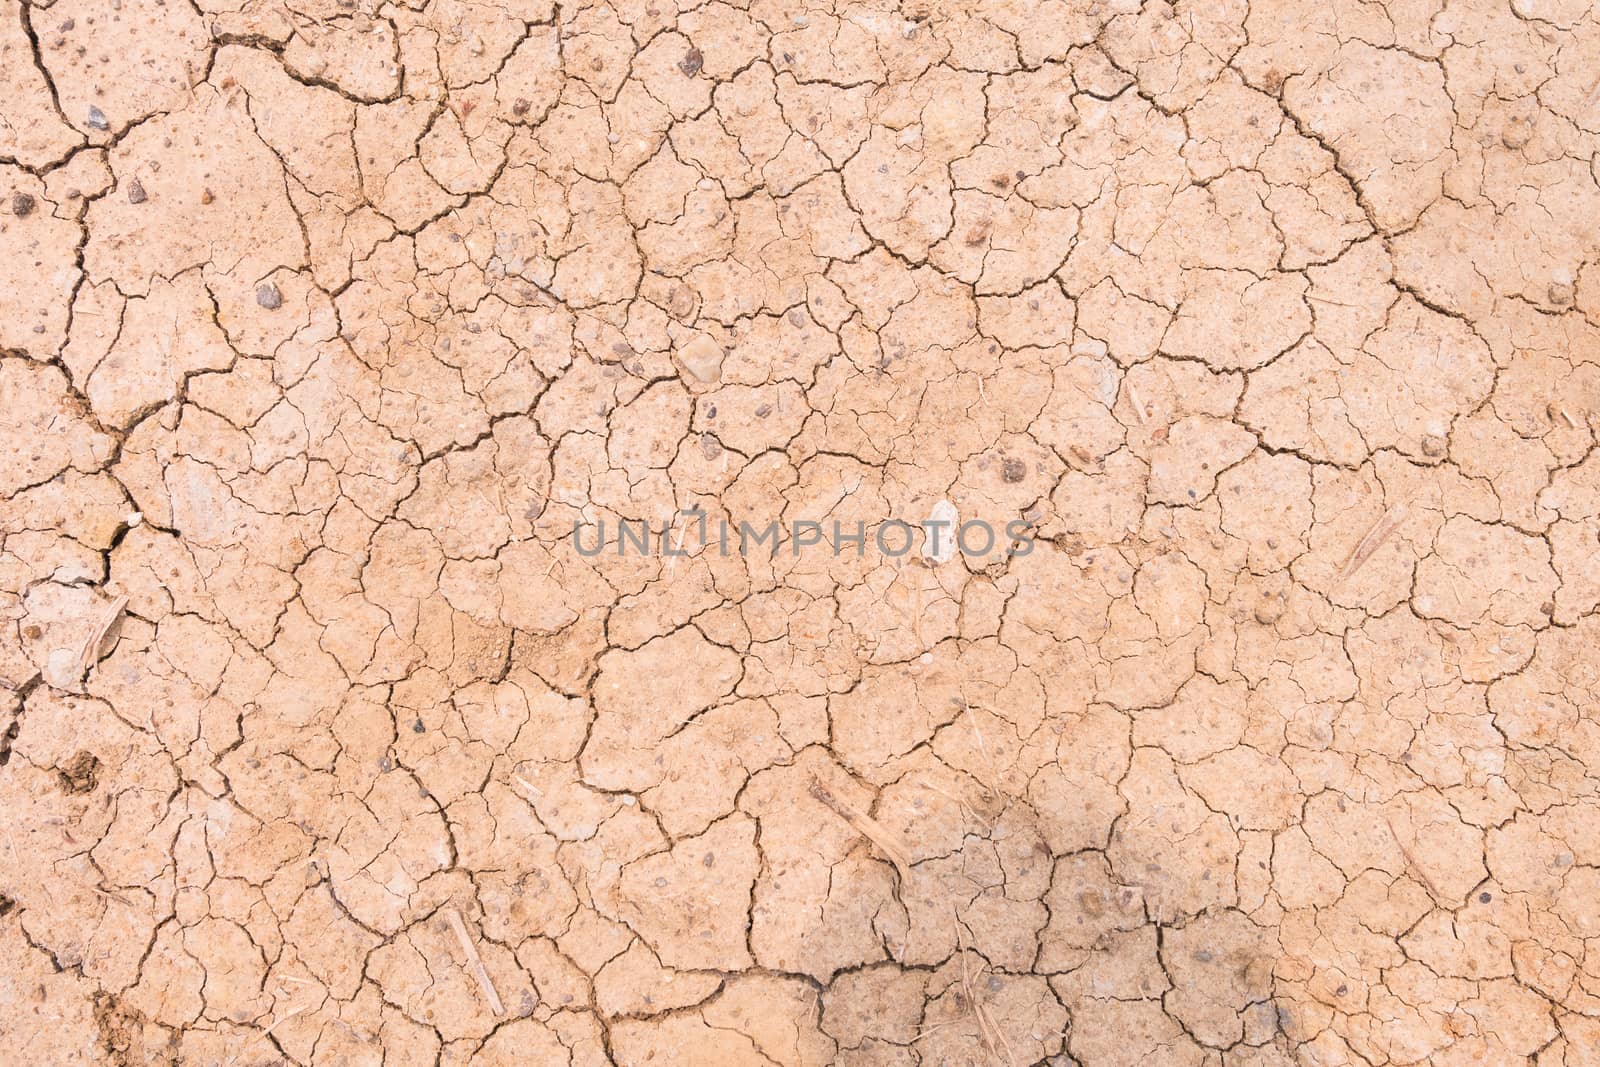 The Dry cracked earth texture